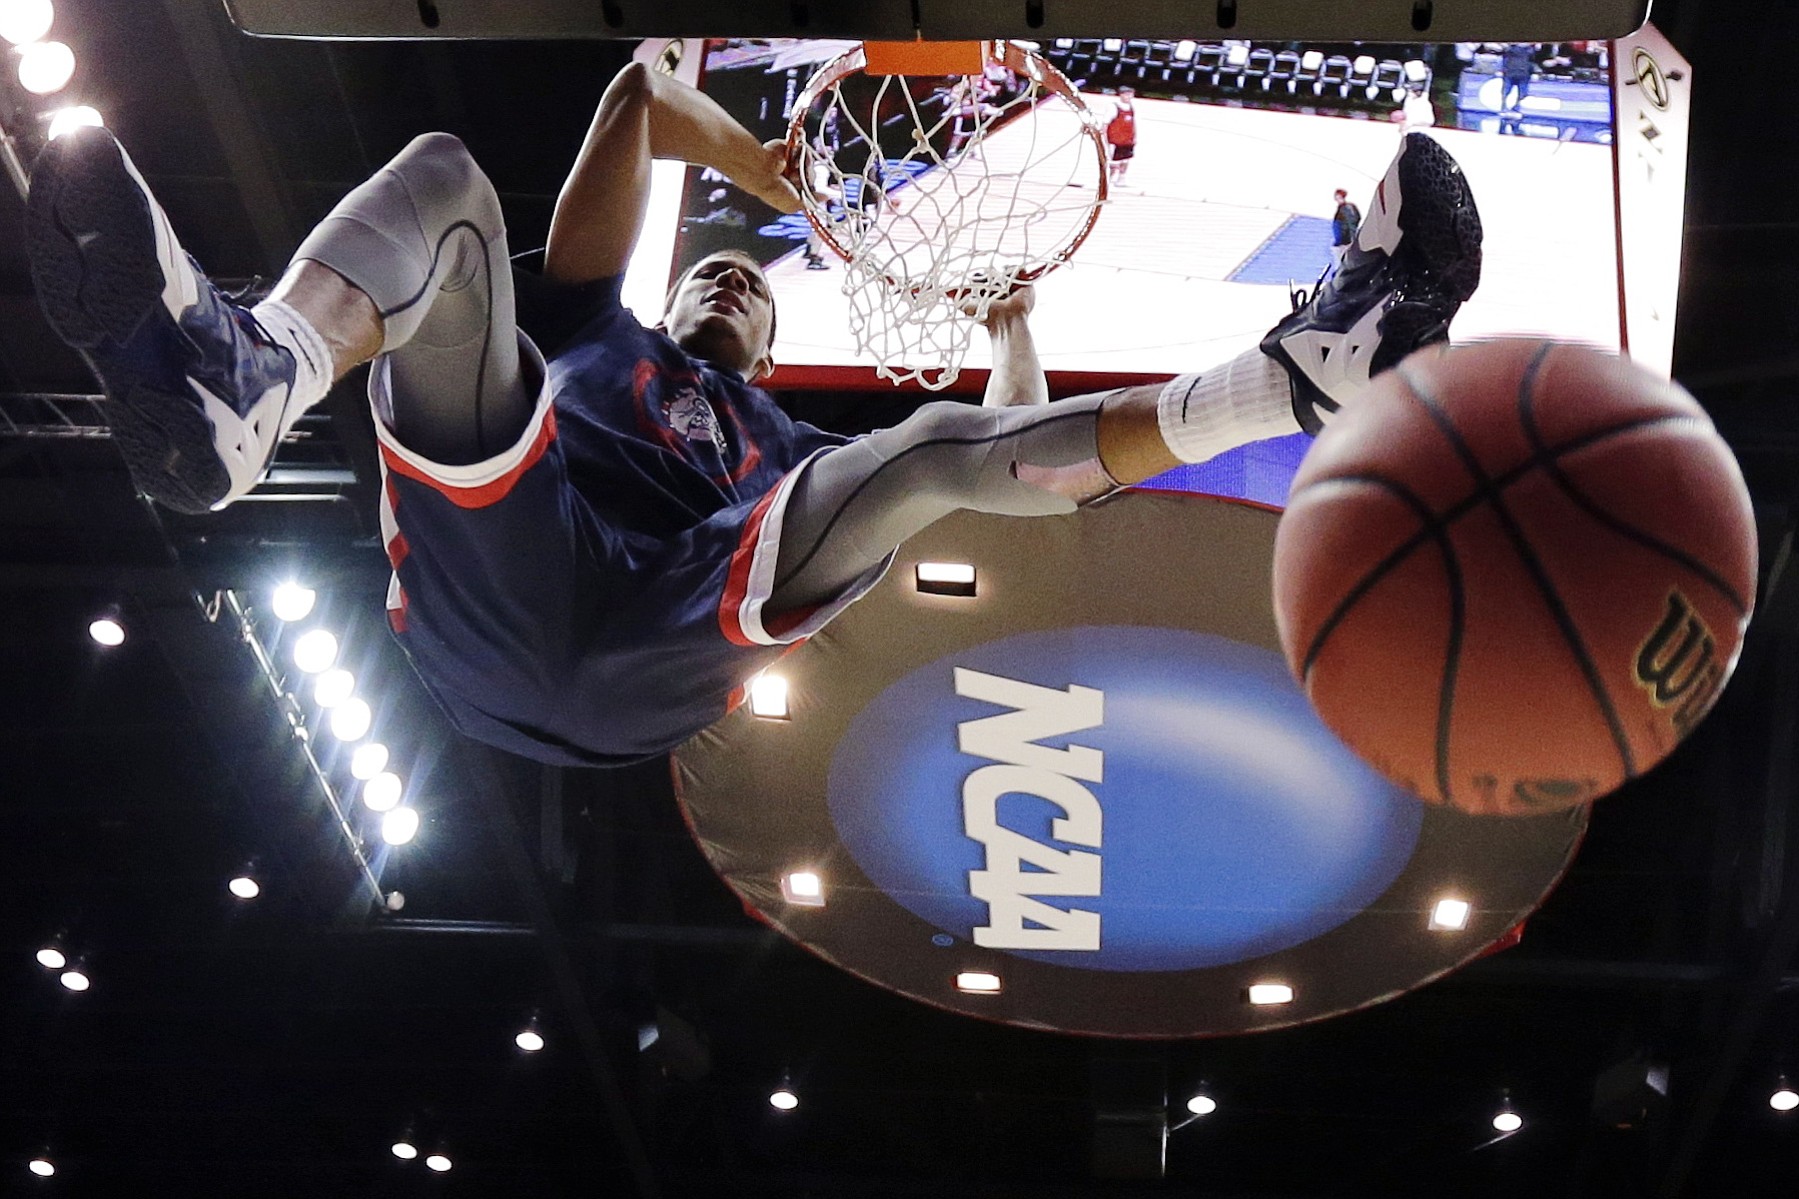 Gonzaga forward Angel Nunez dunks during practice at the NCAA college basketball tournament in San Diego.